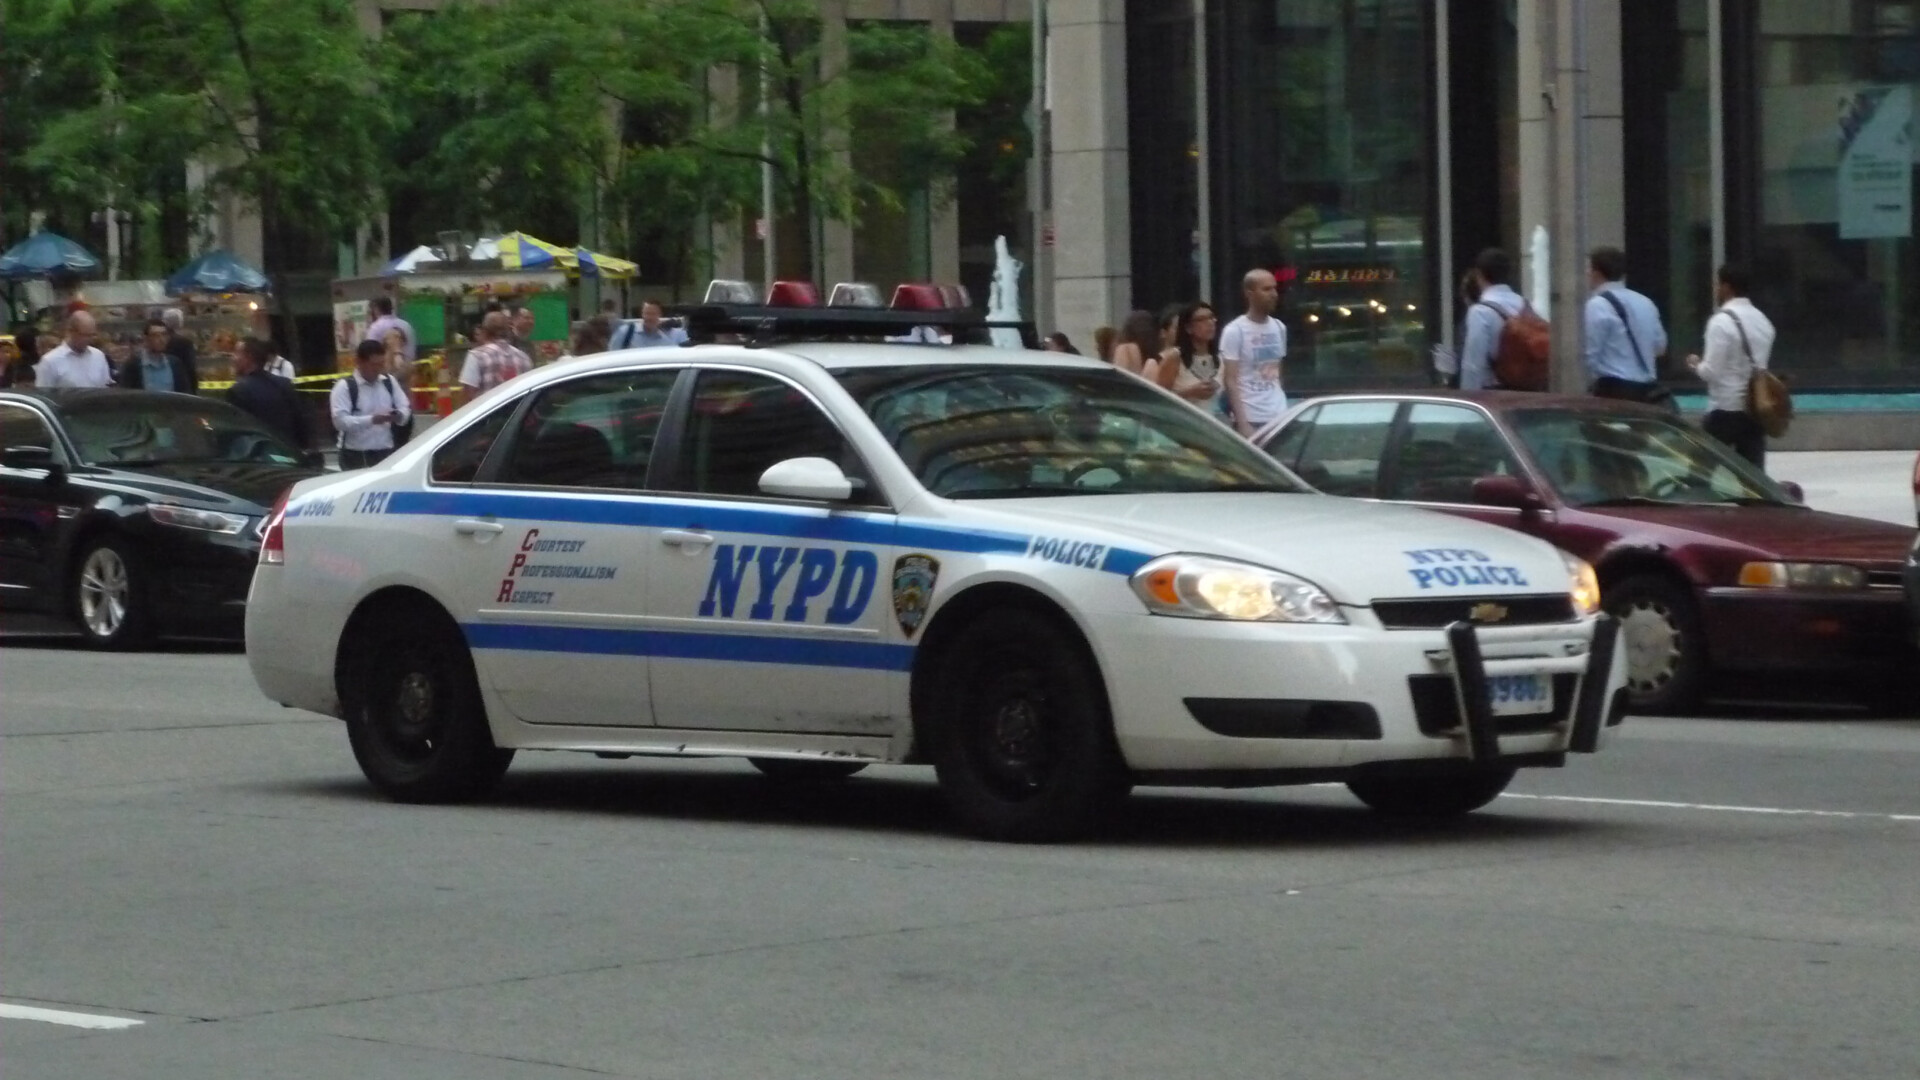 A NYPD patrol car parked on a city street.